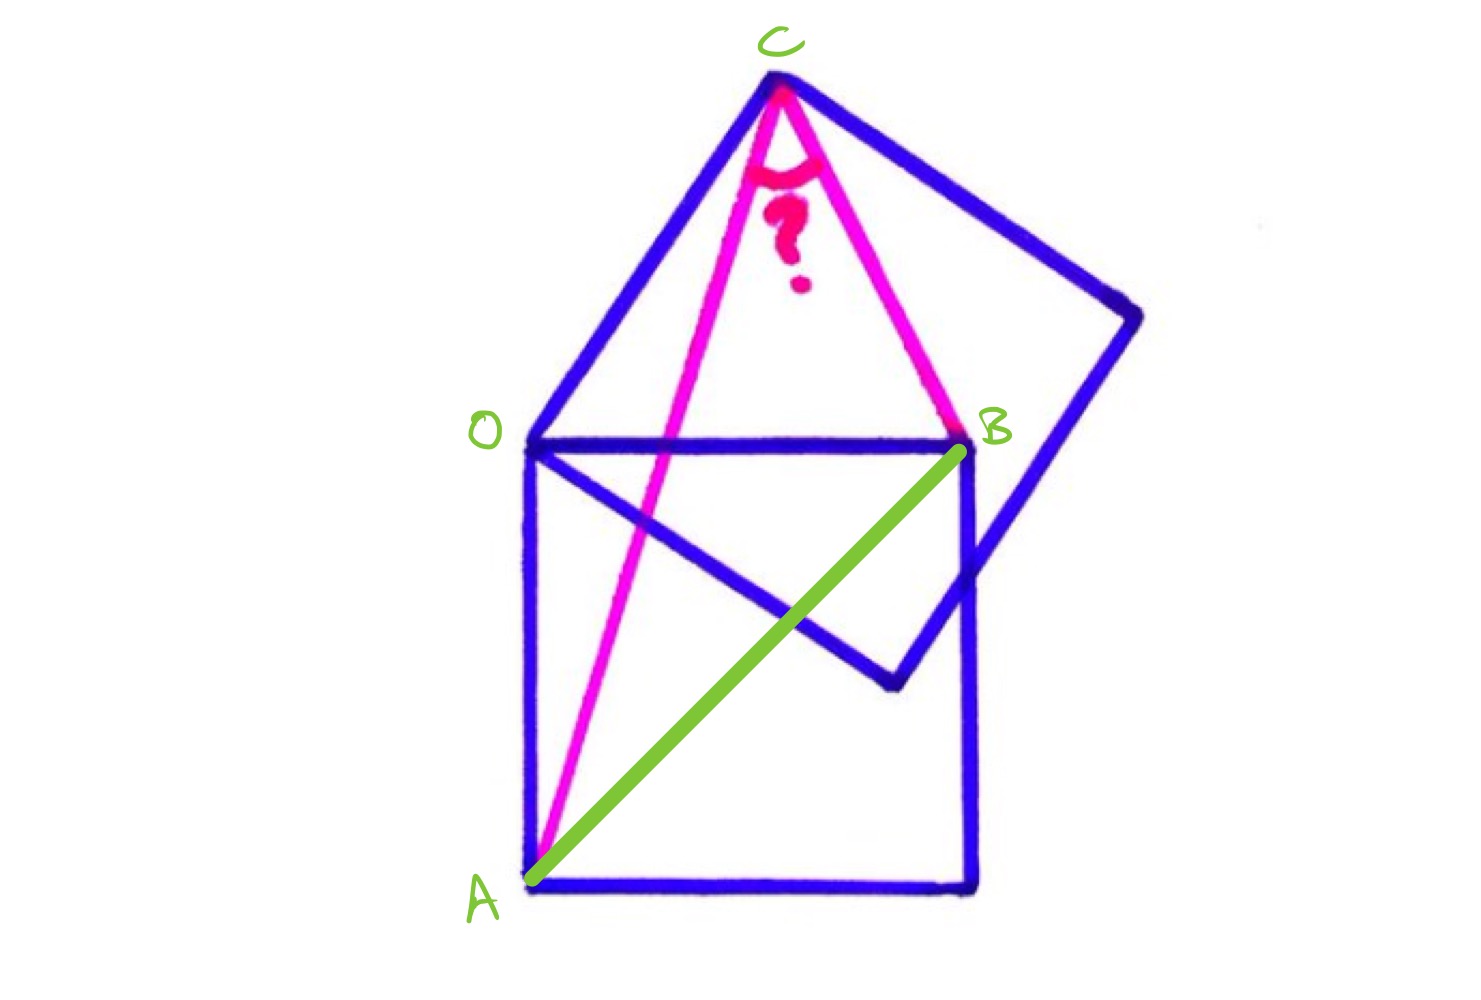 Angle formed by two squares II isosceles